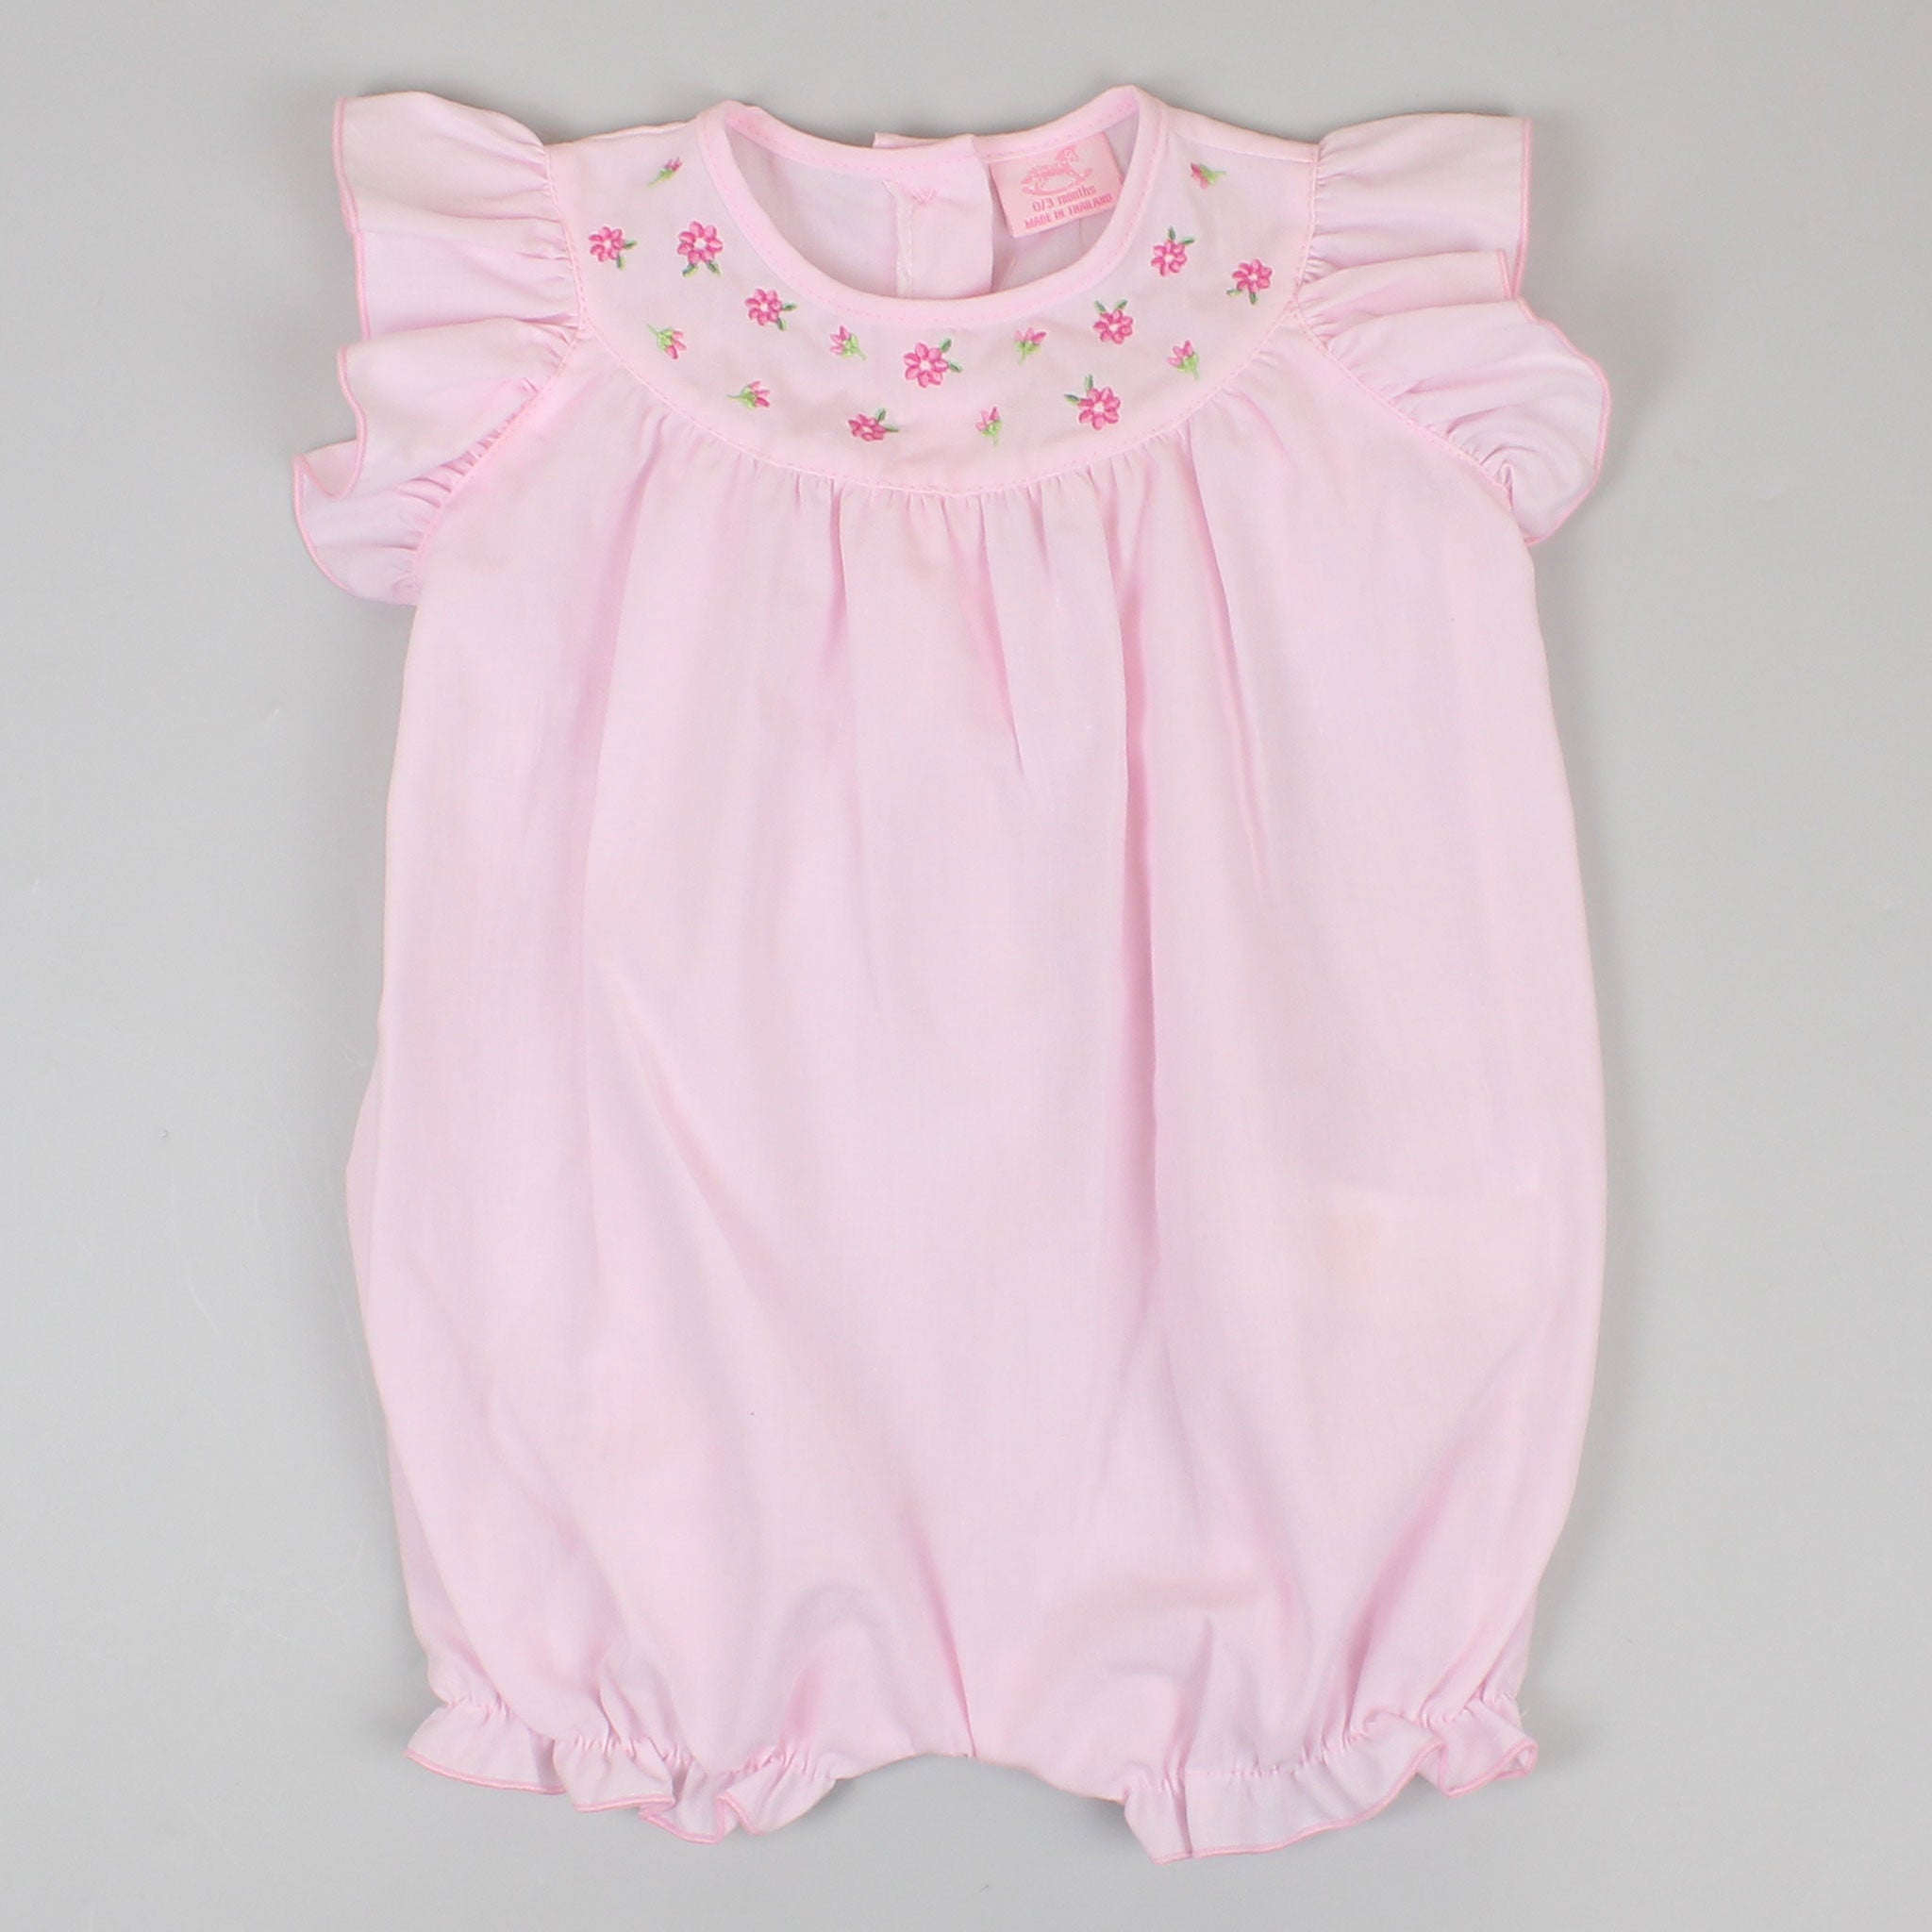 baby girls pink romper with flowers summer outfit